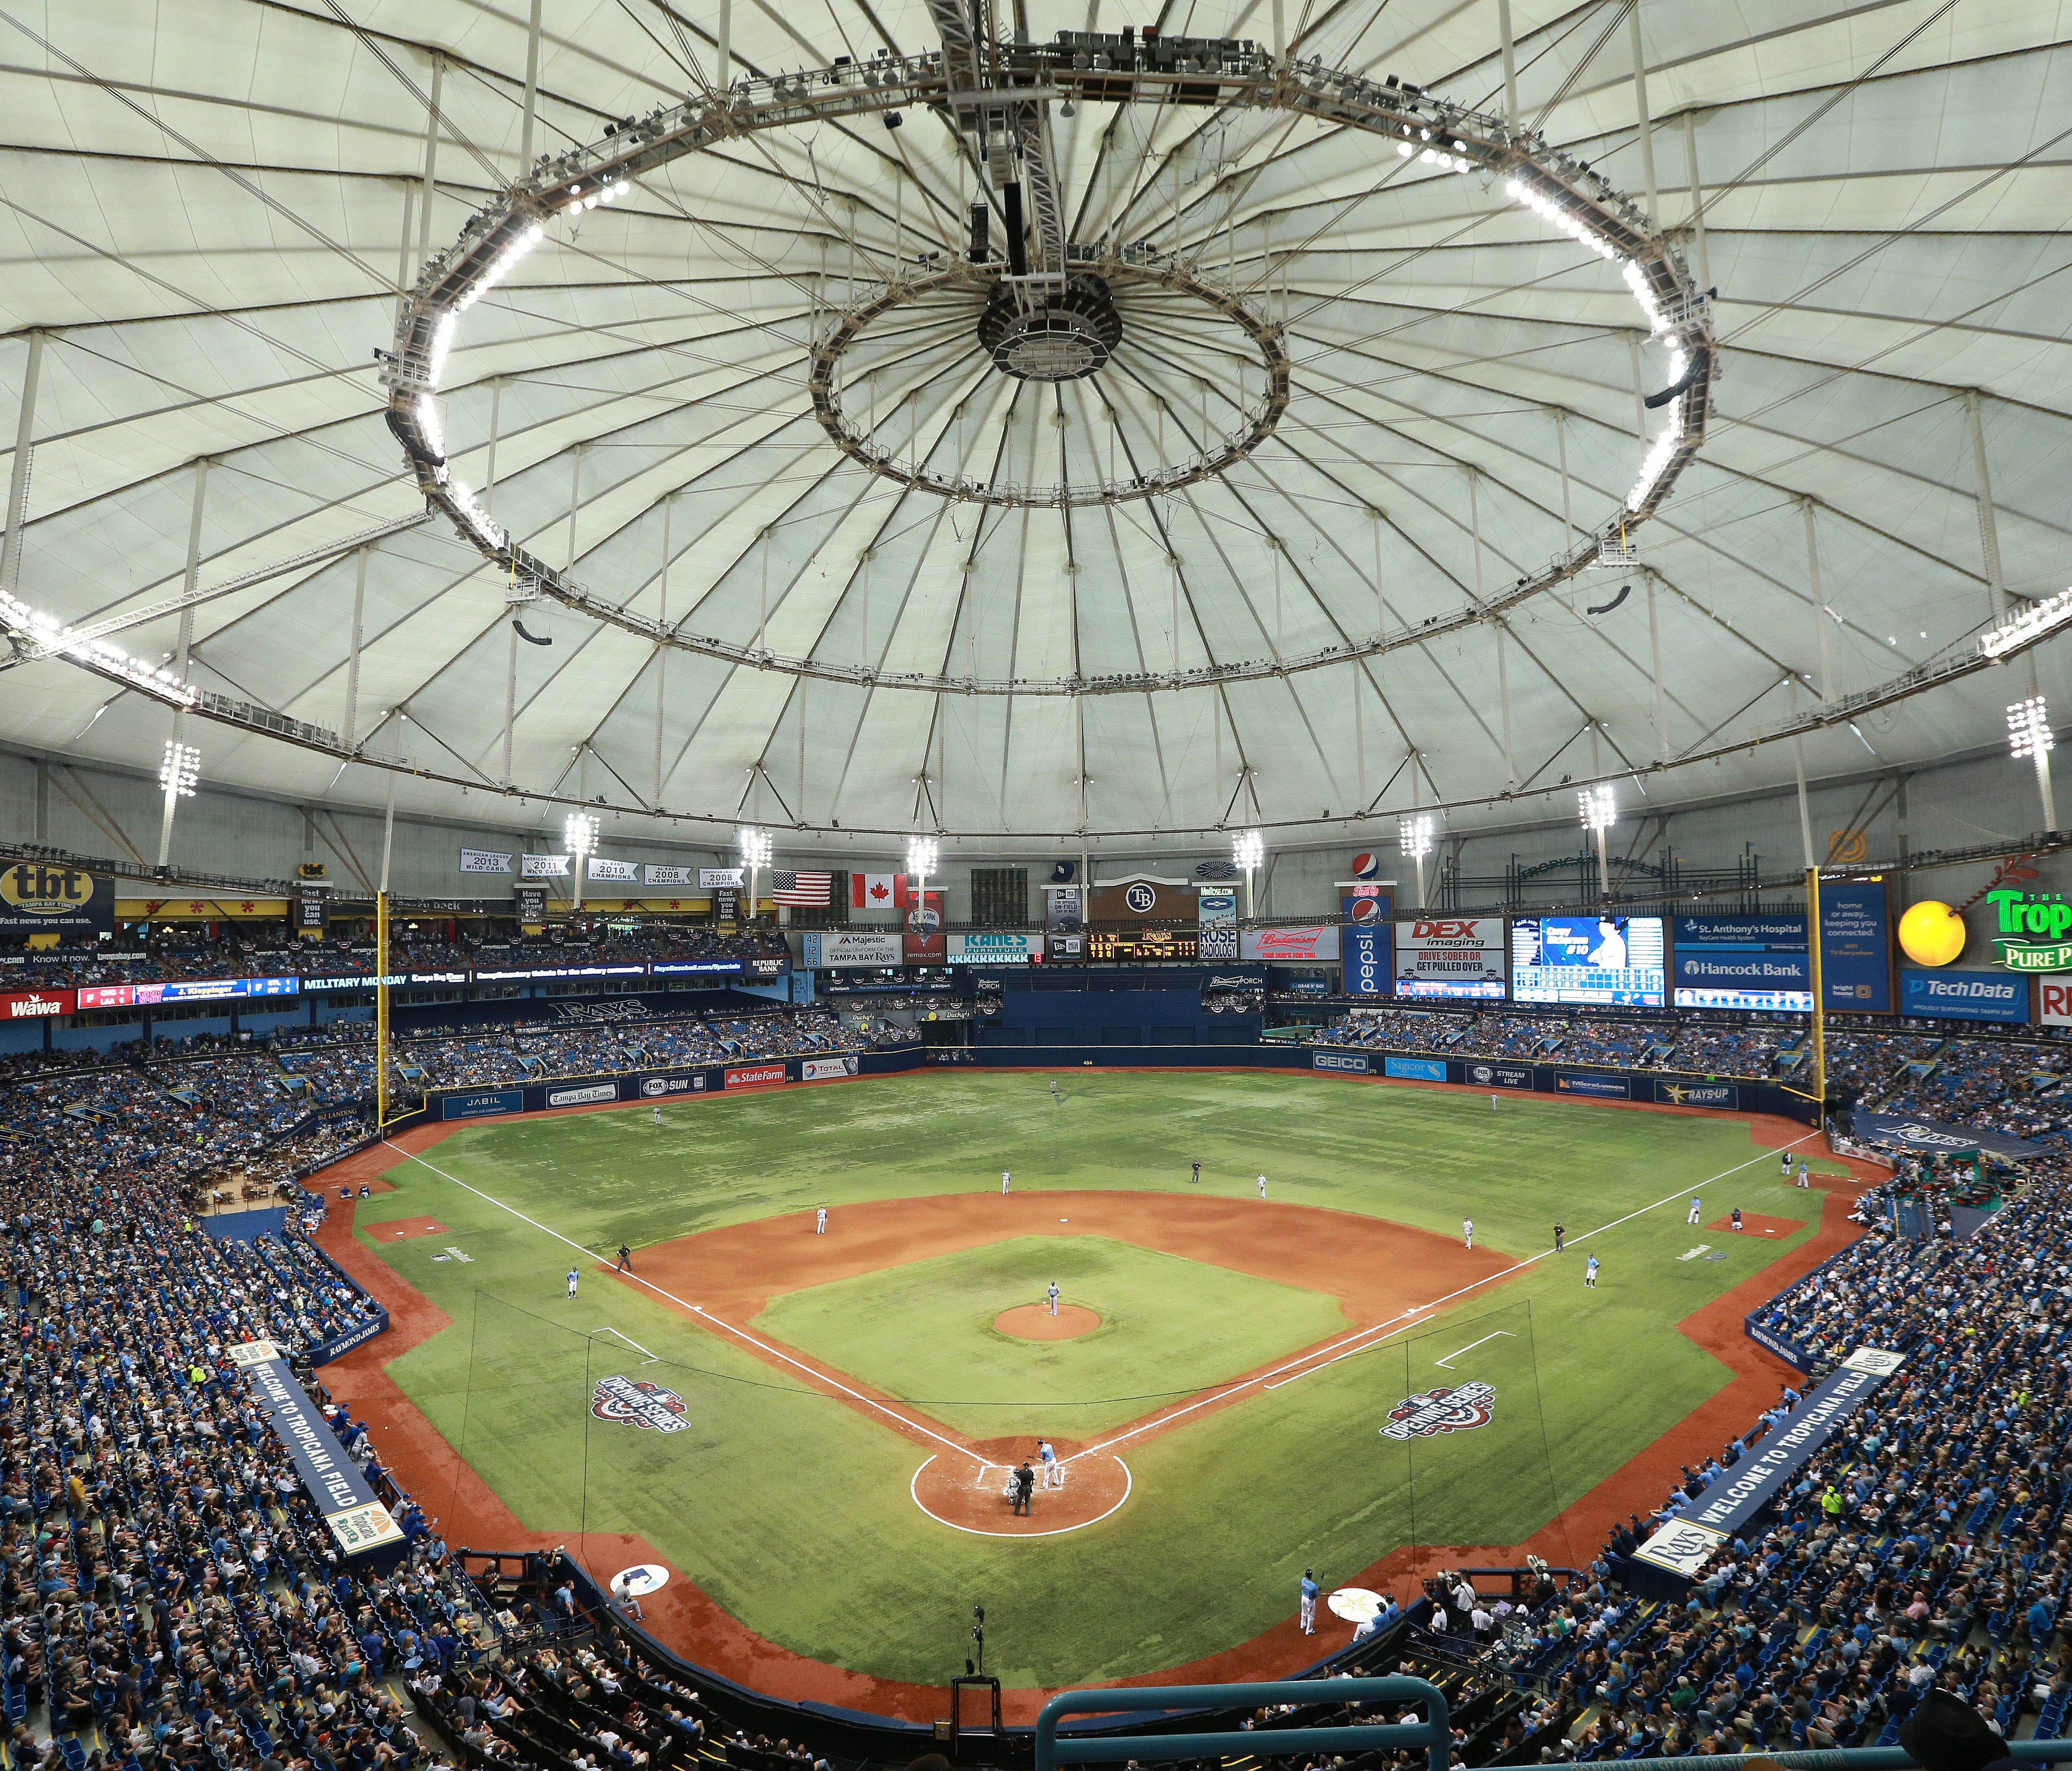 Tropicana Field will host the Rangers and Astros series.